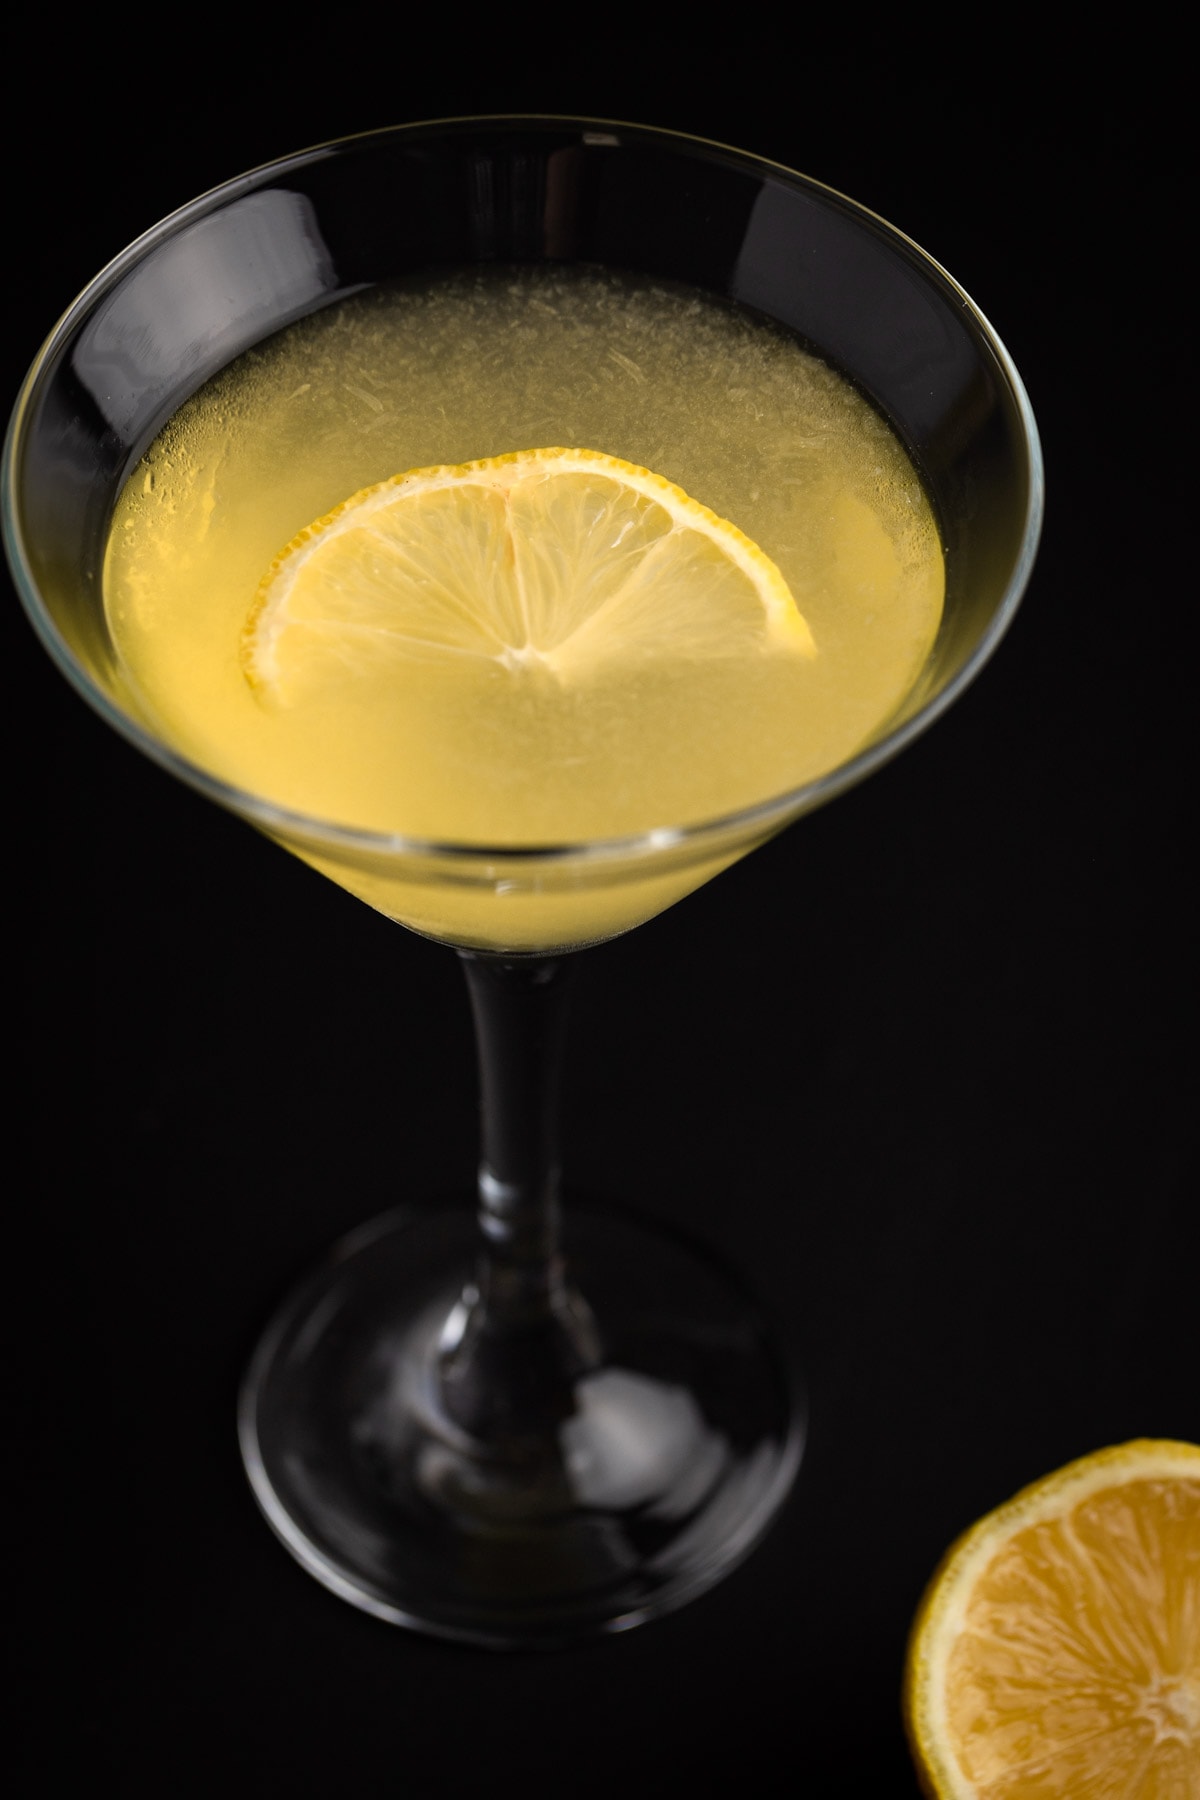 Overhead view of a limoncello martini garnished with a lime slice, on a black background.